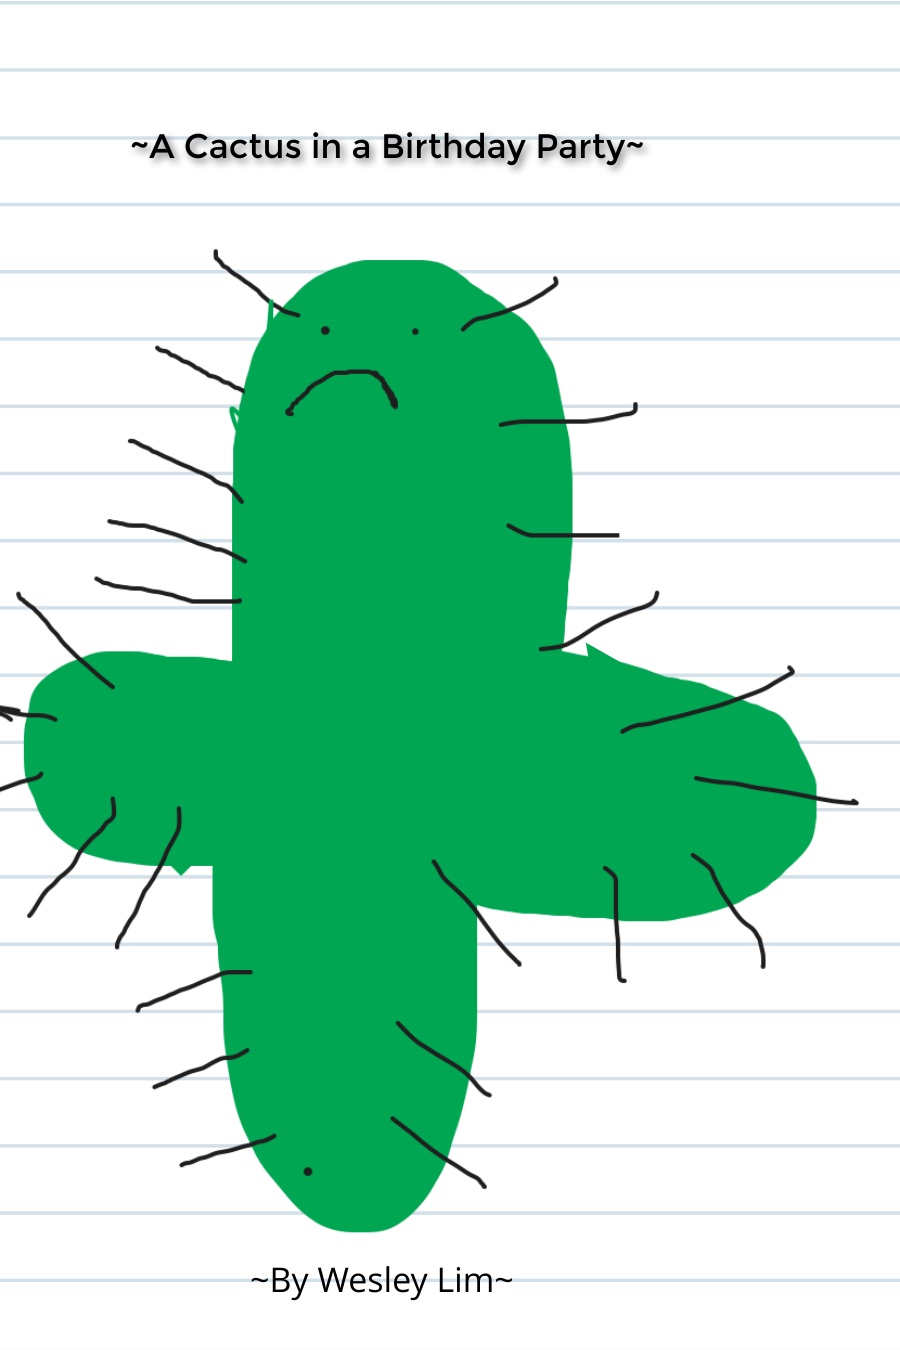 A cactus in a birthday